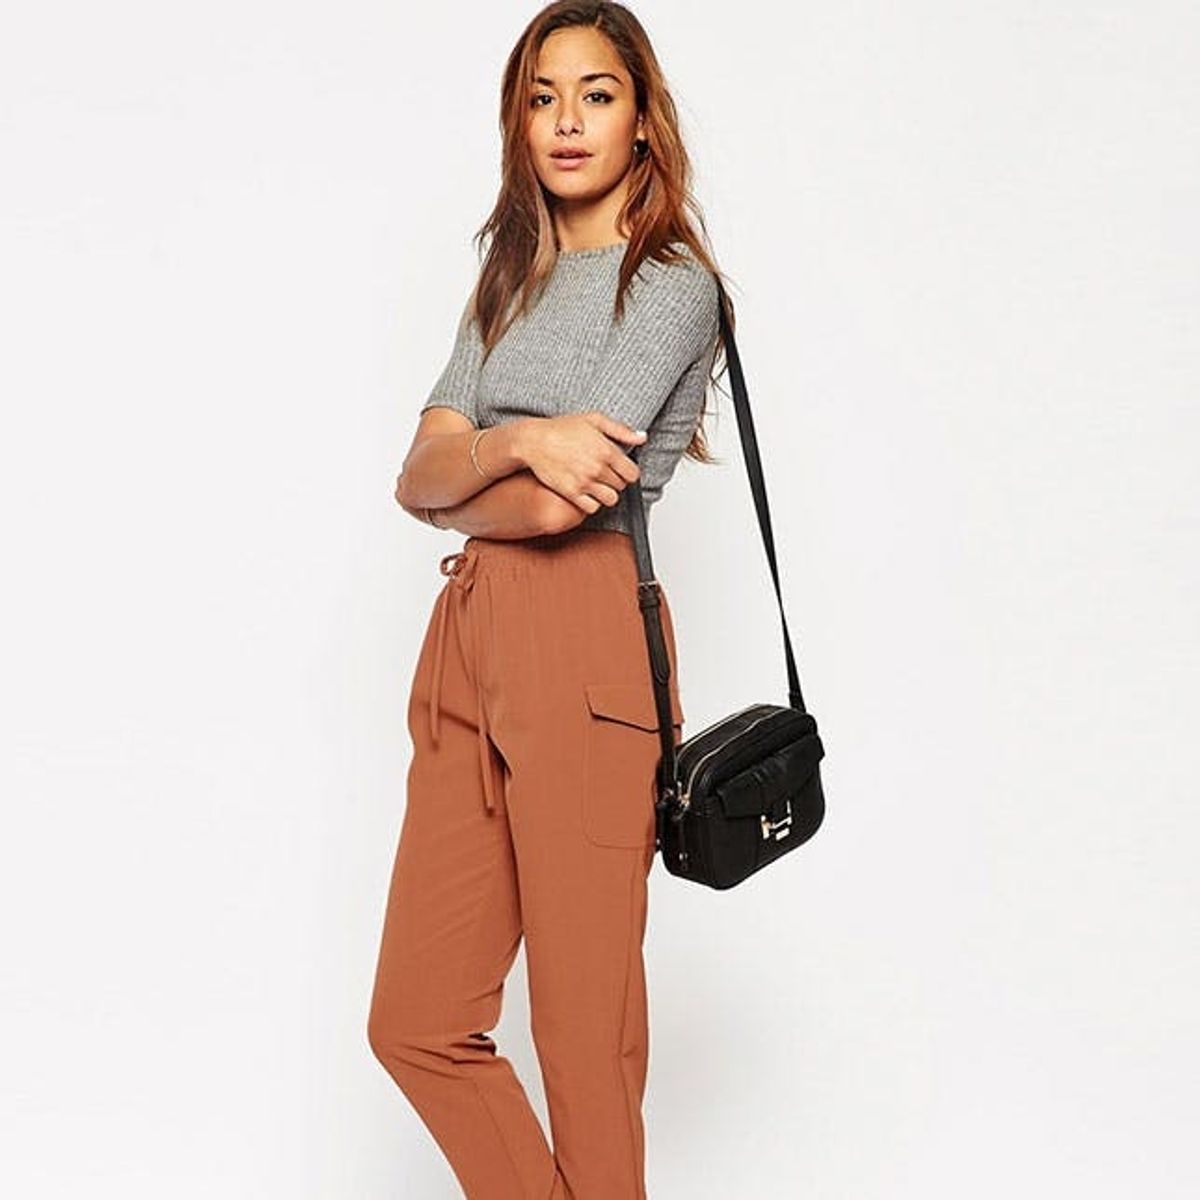 You’ll Want to Buy Every Fall Wardrobe Basic in This Unexpected Color